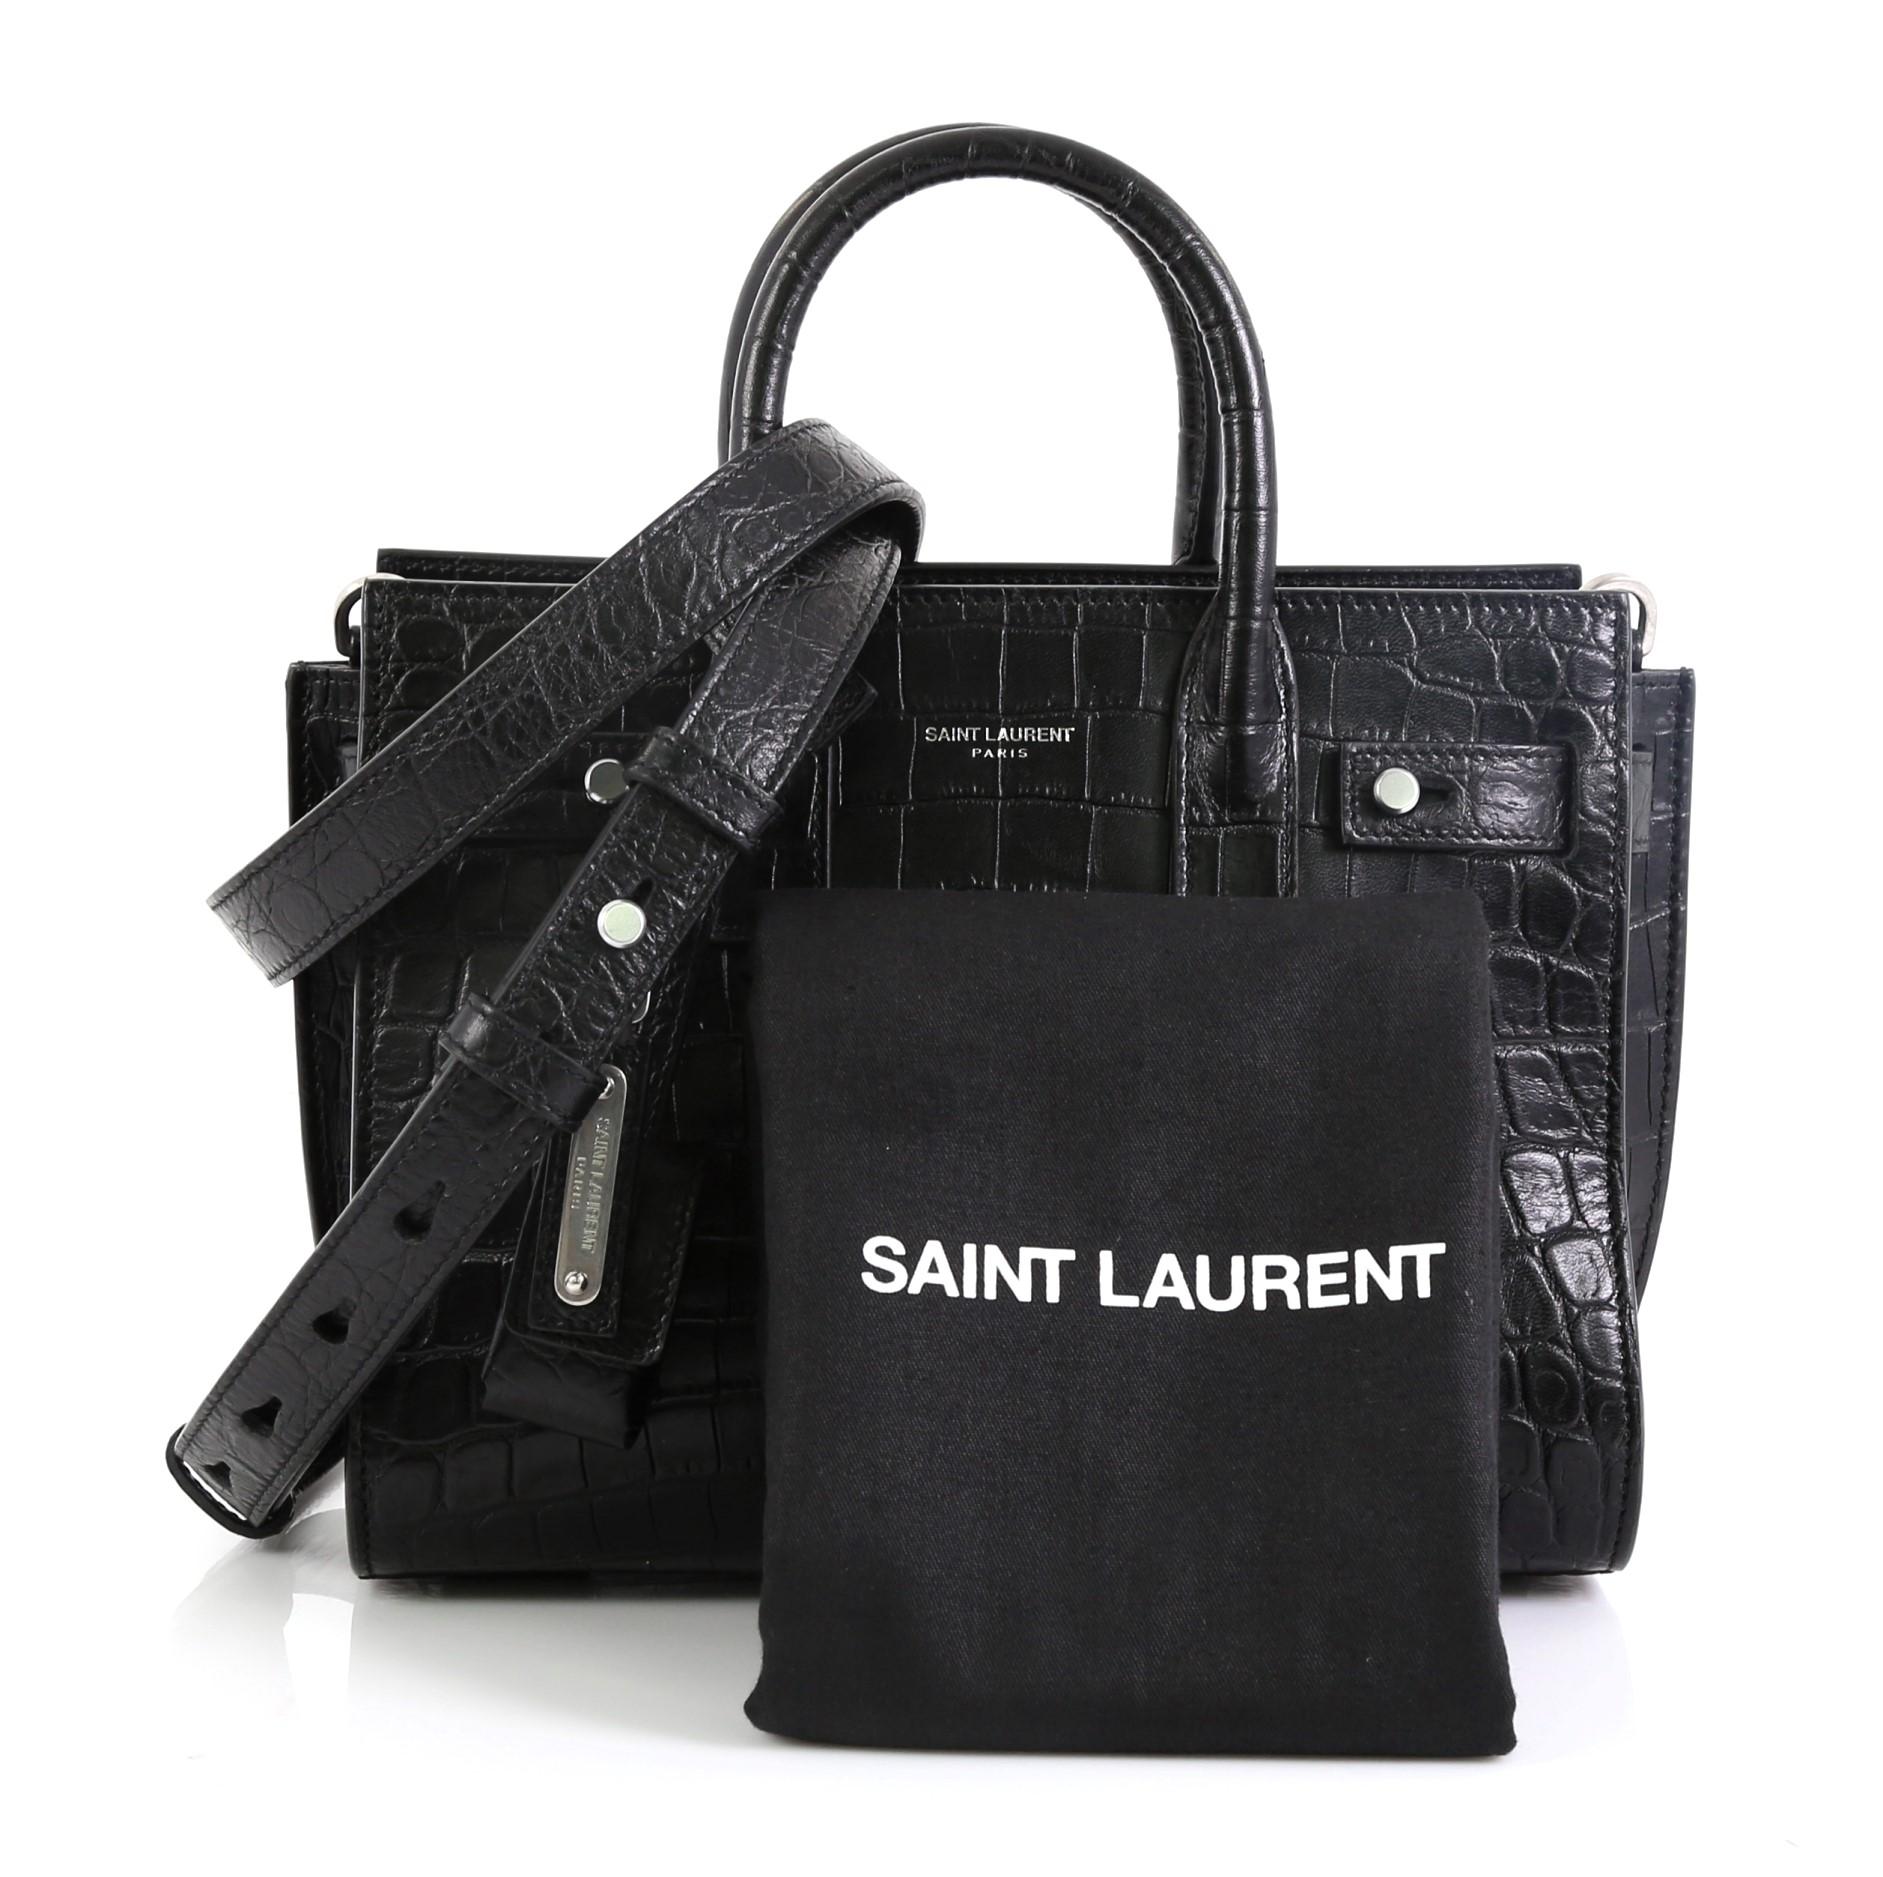 This Saint Laurent Sac de Jour Souple Bag Crocodile Embossed Leather Nano, crafted from black crocodile embossed leather, features dual rolled leather handles, accordion sides, leather tabs threaded through side gusset, and silver-tone hardware. It